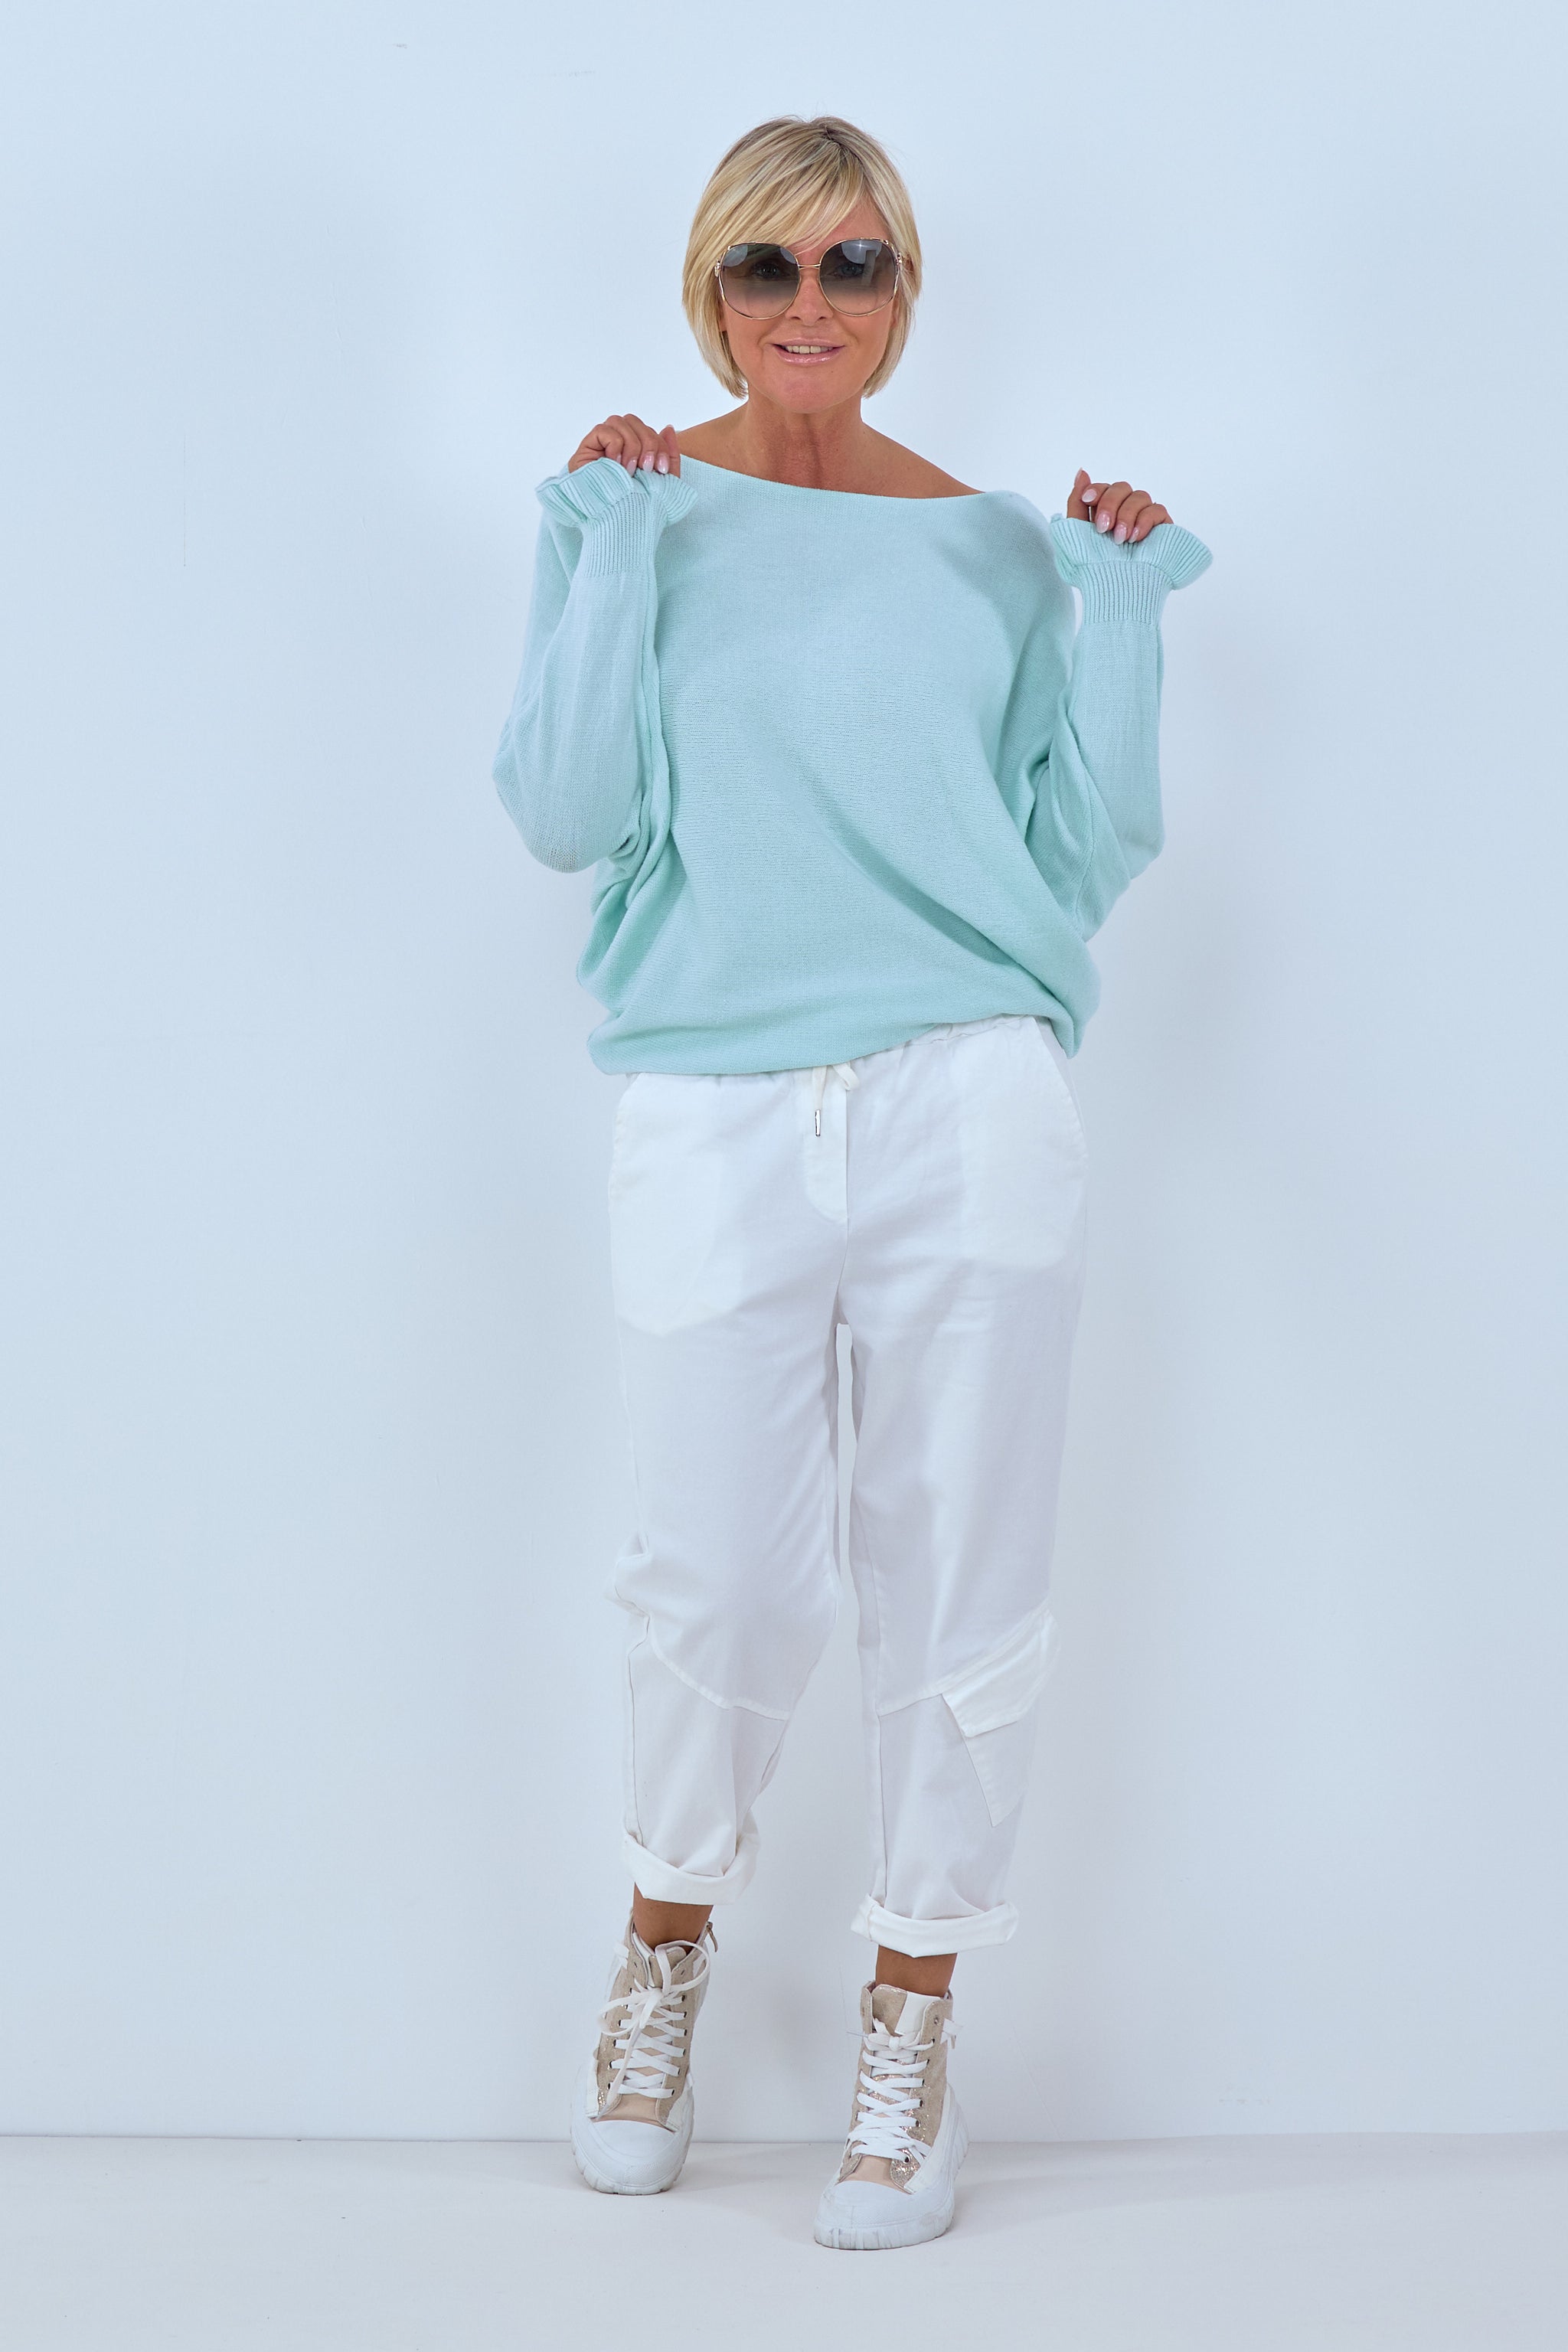 Sweater with batwing sleeves, mint